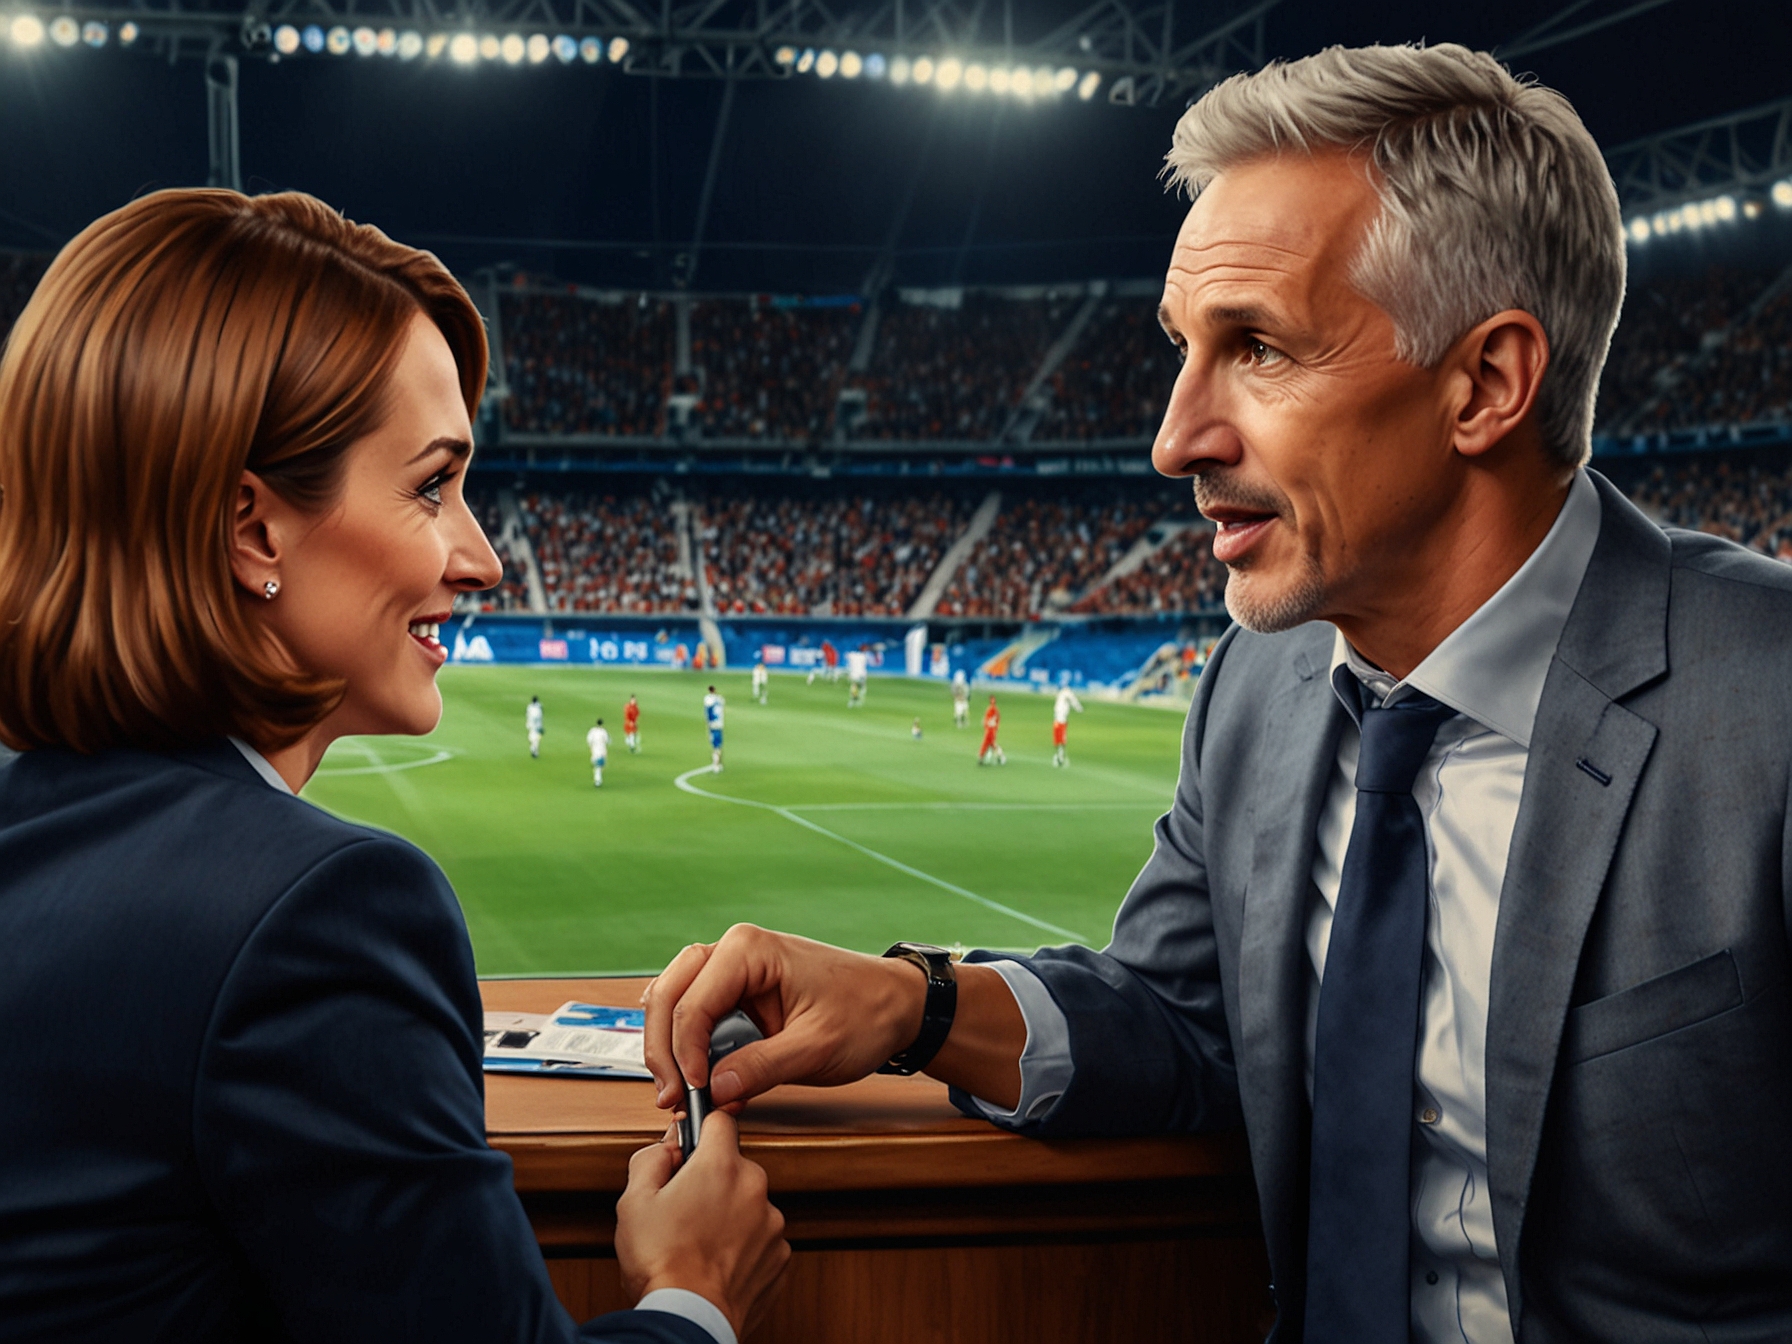 Gary Lineker discussing Harry Kane's performance on a sports broadcast.